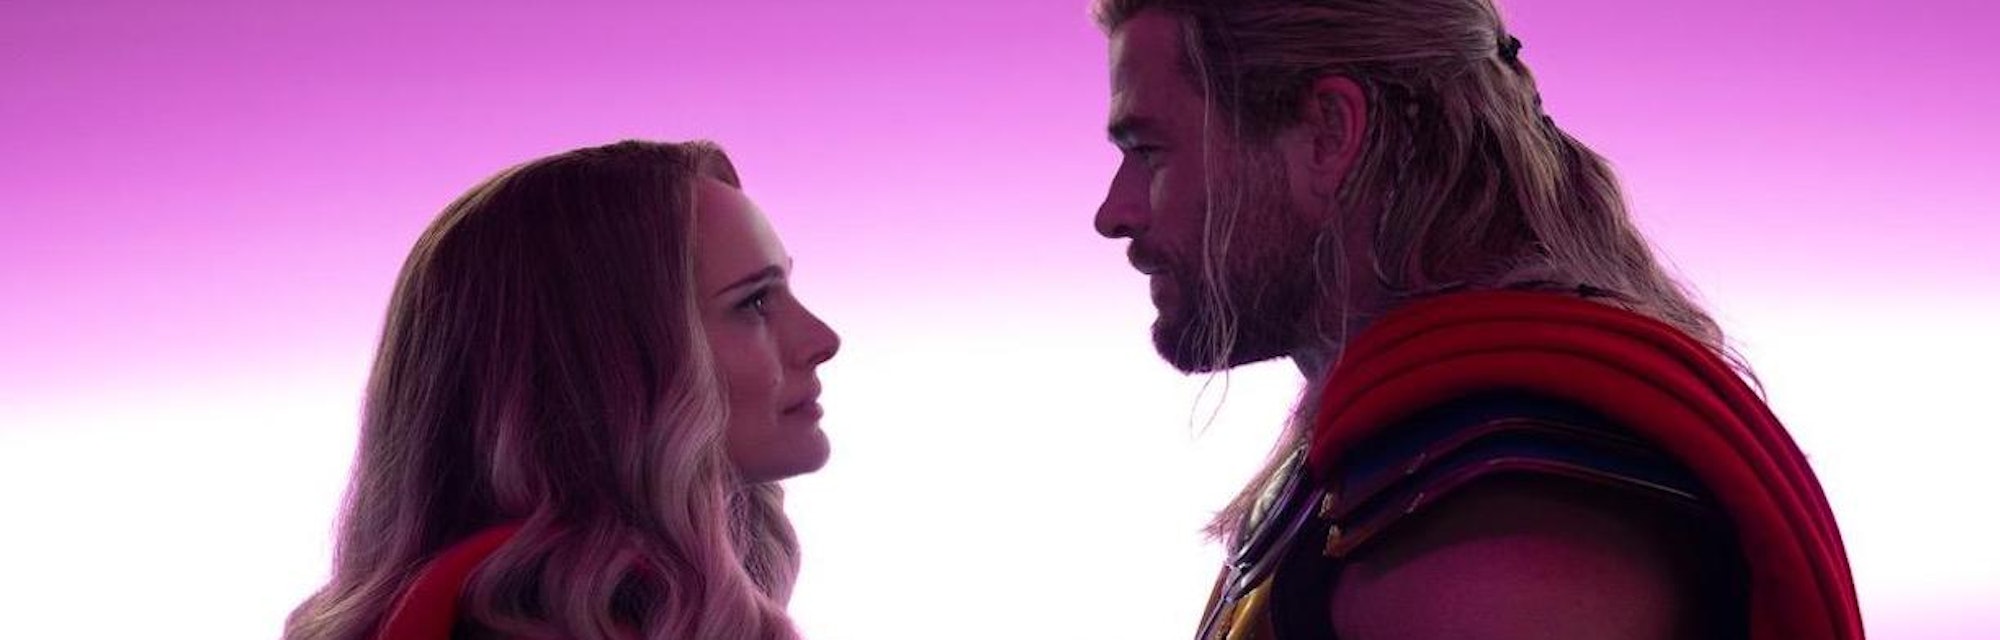 thor love and thunder thor and jane purple background